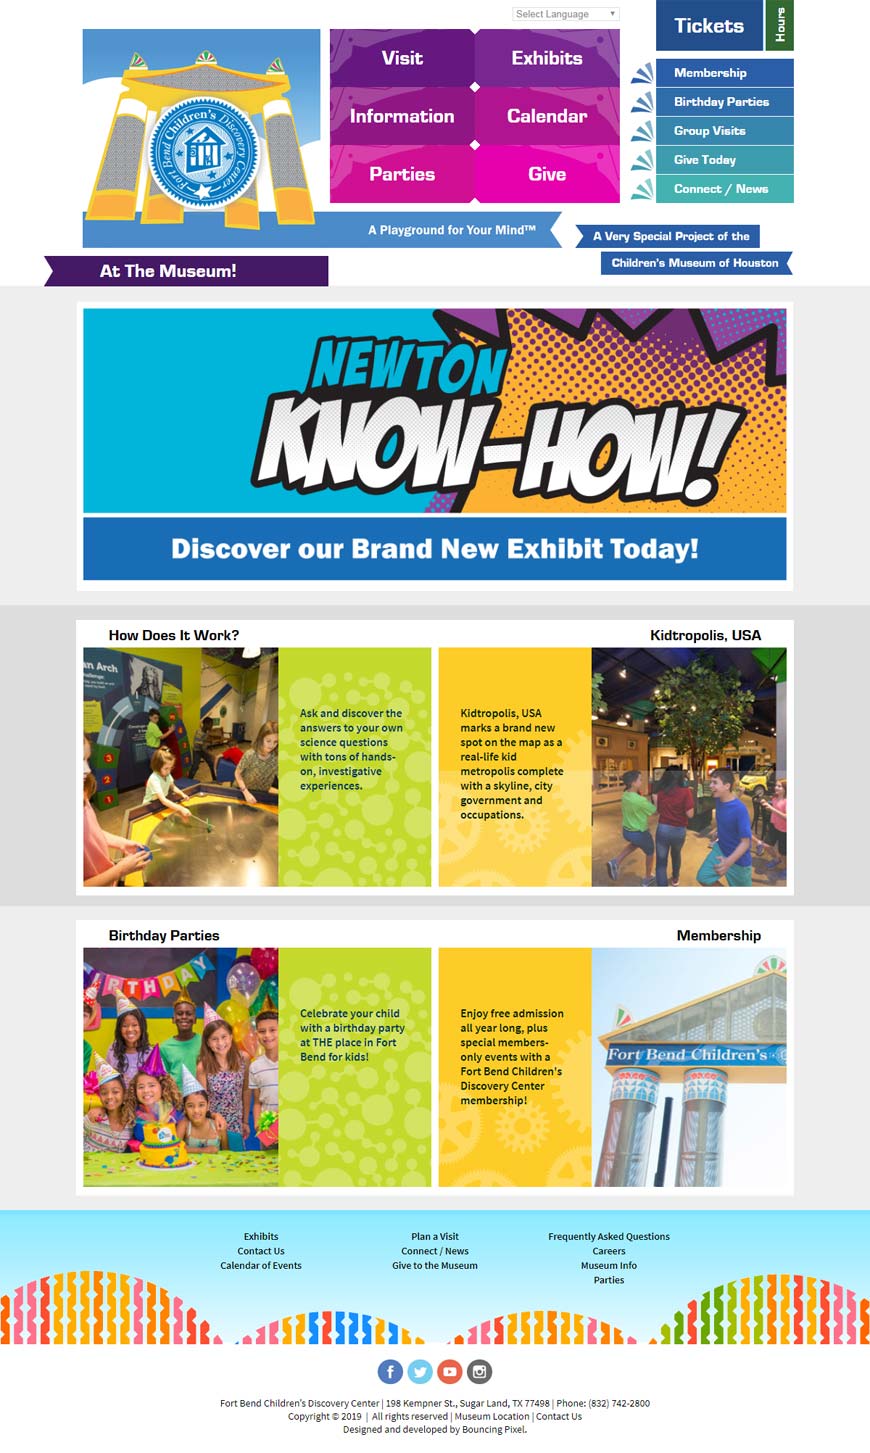 Fort Bend Children's Discovery Center Home Page